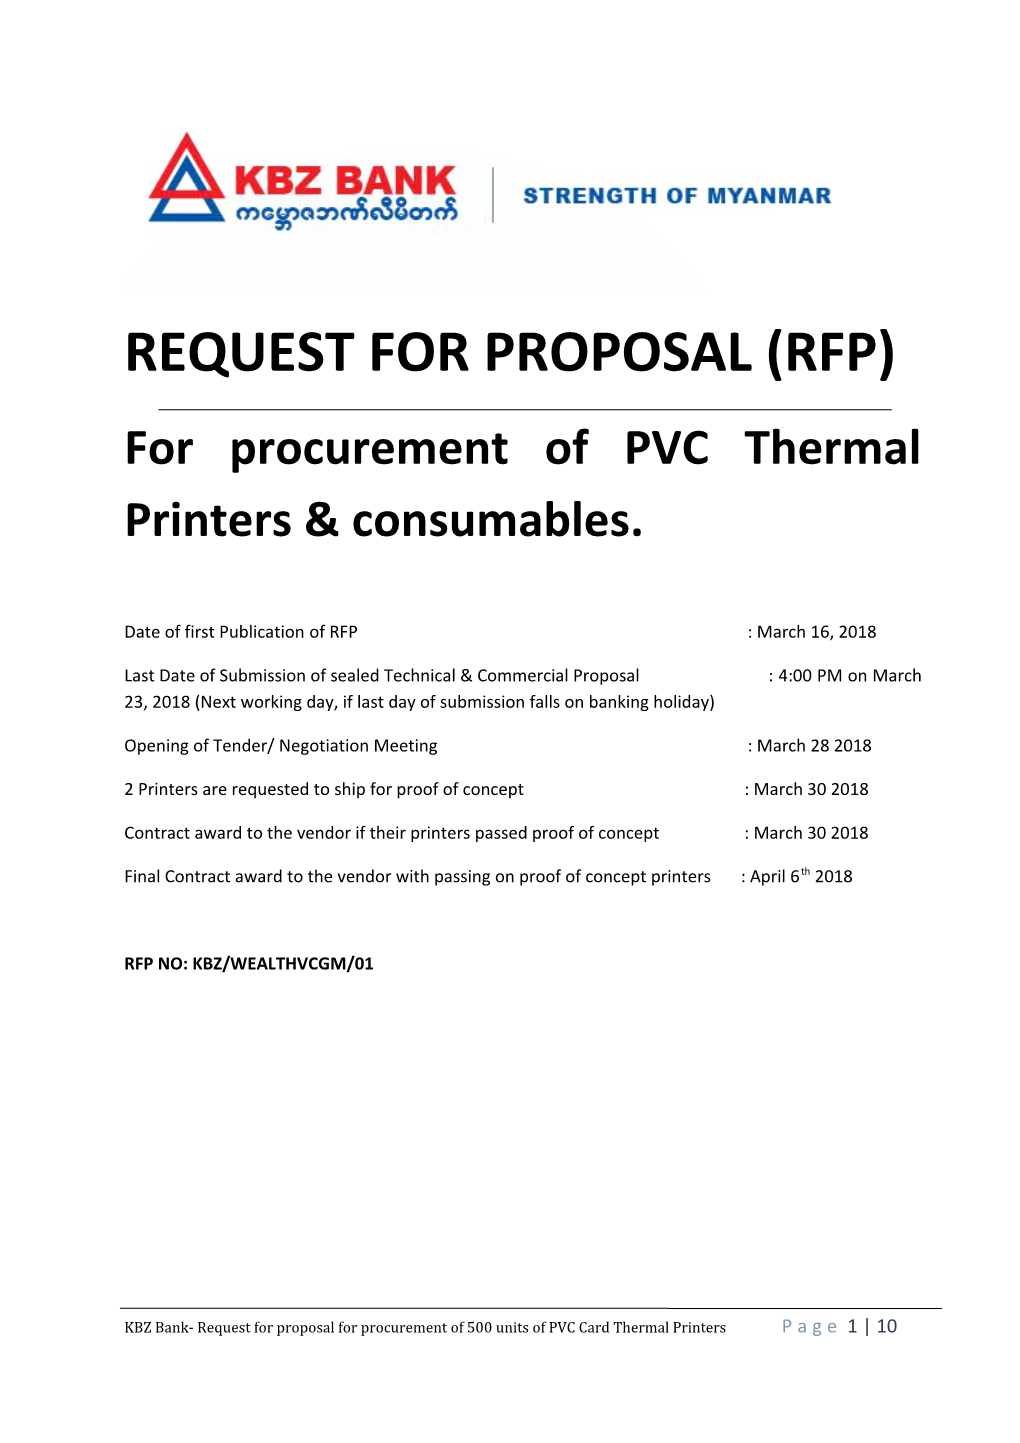 For Procurement of PVC Thermal Printers & Consumables